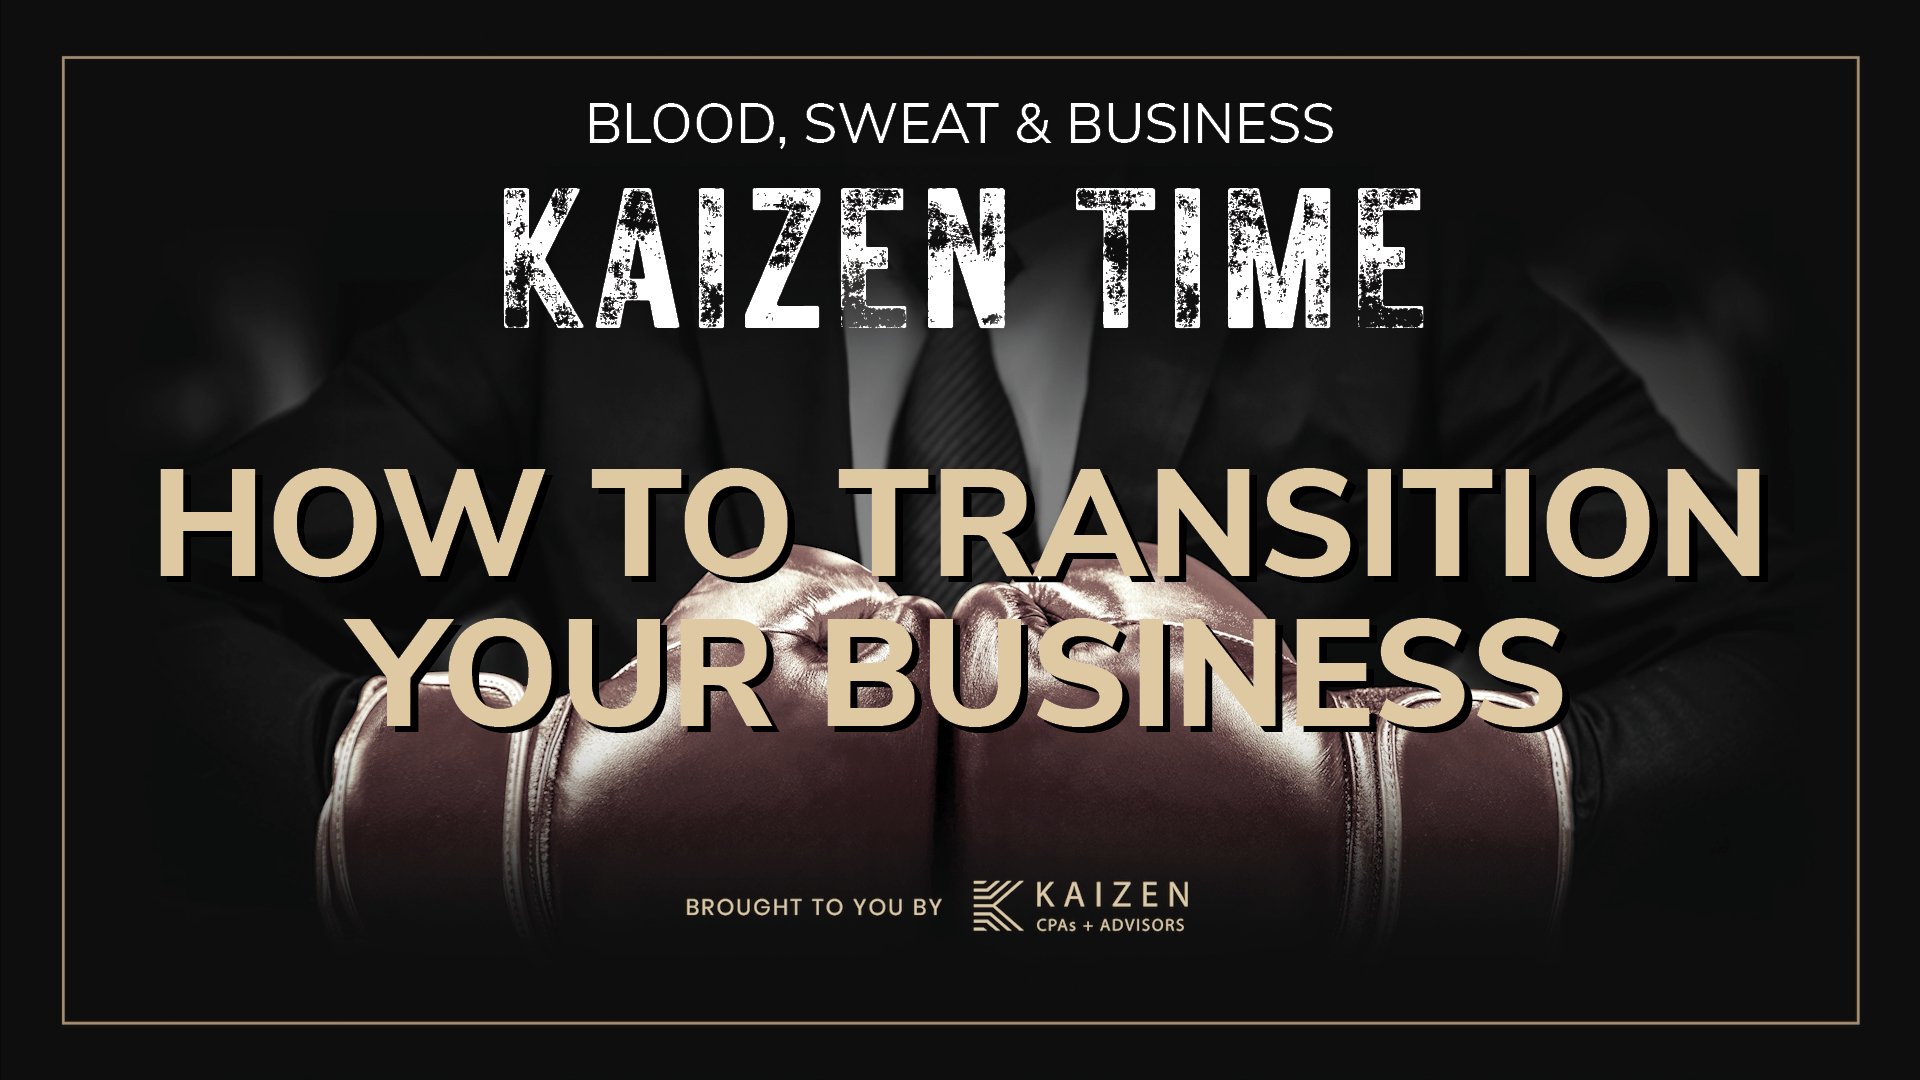 Learn how to smoothly transition ownership of a small business.